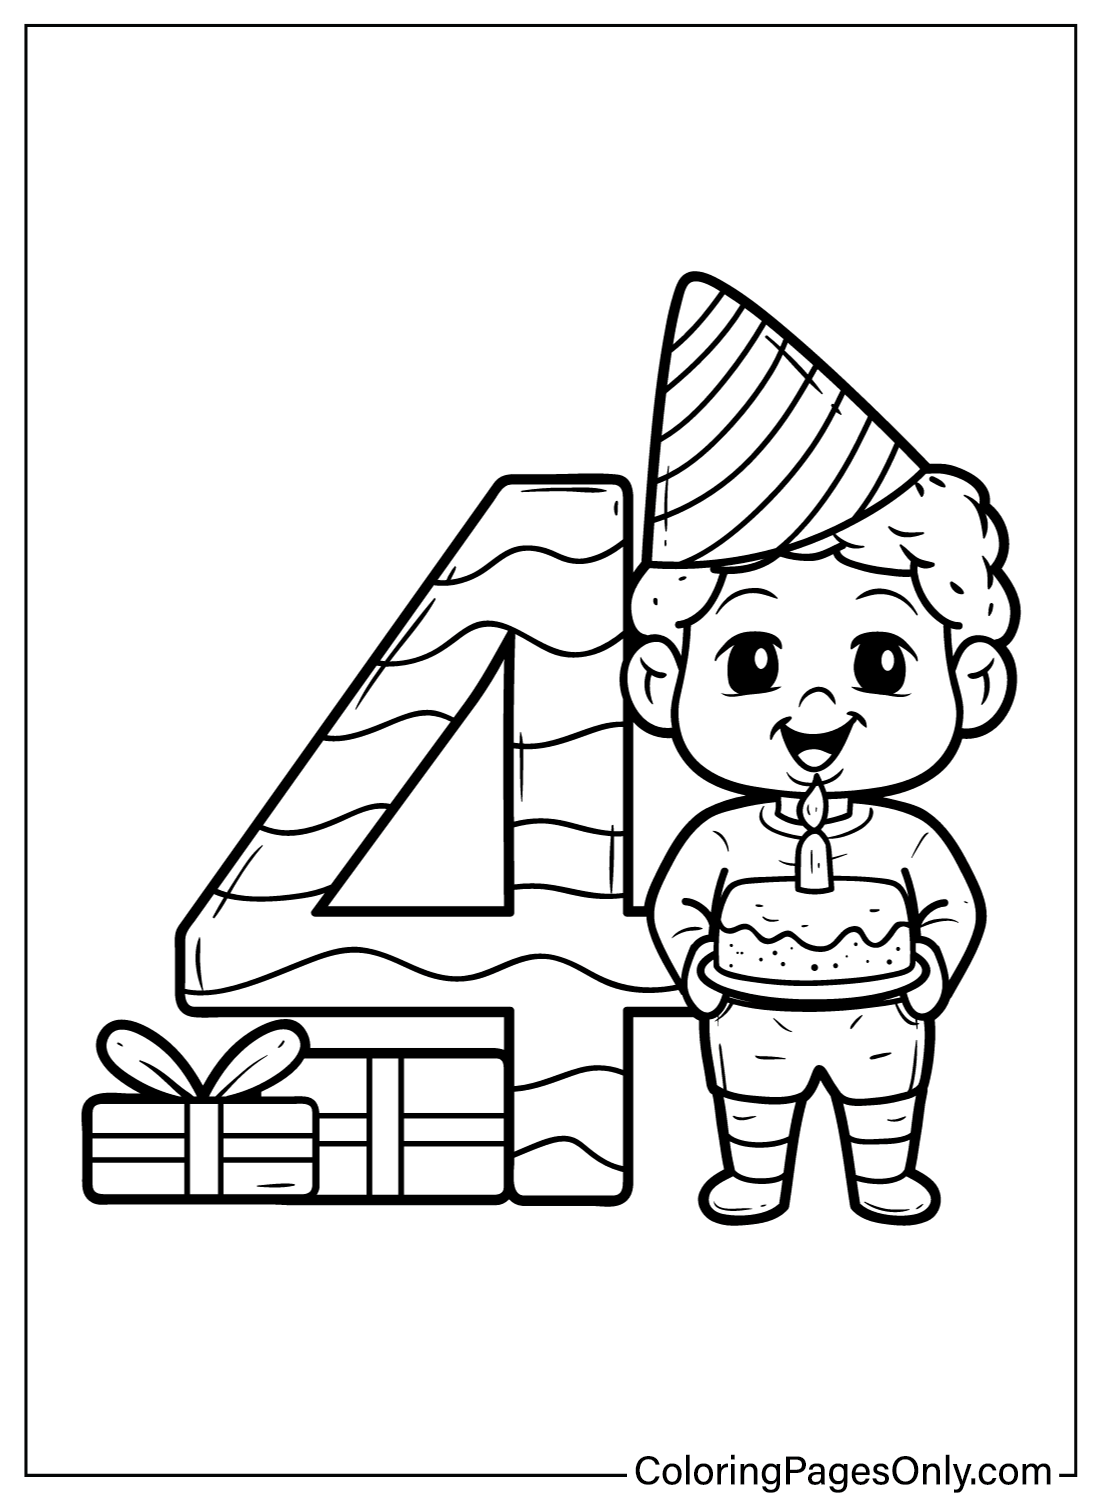 Coloring Page Number Free from Numbers